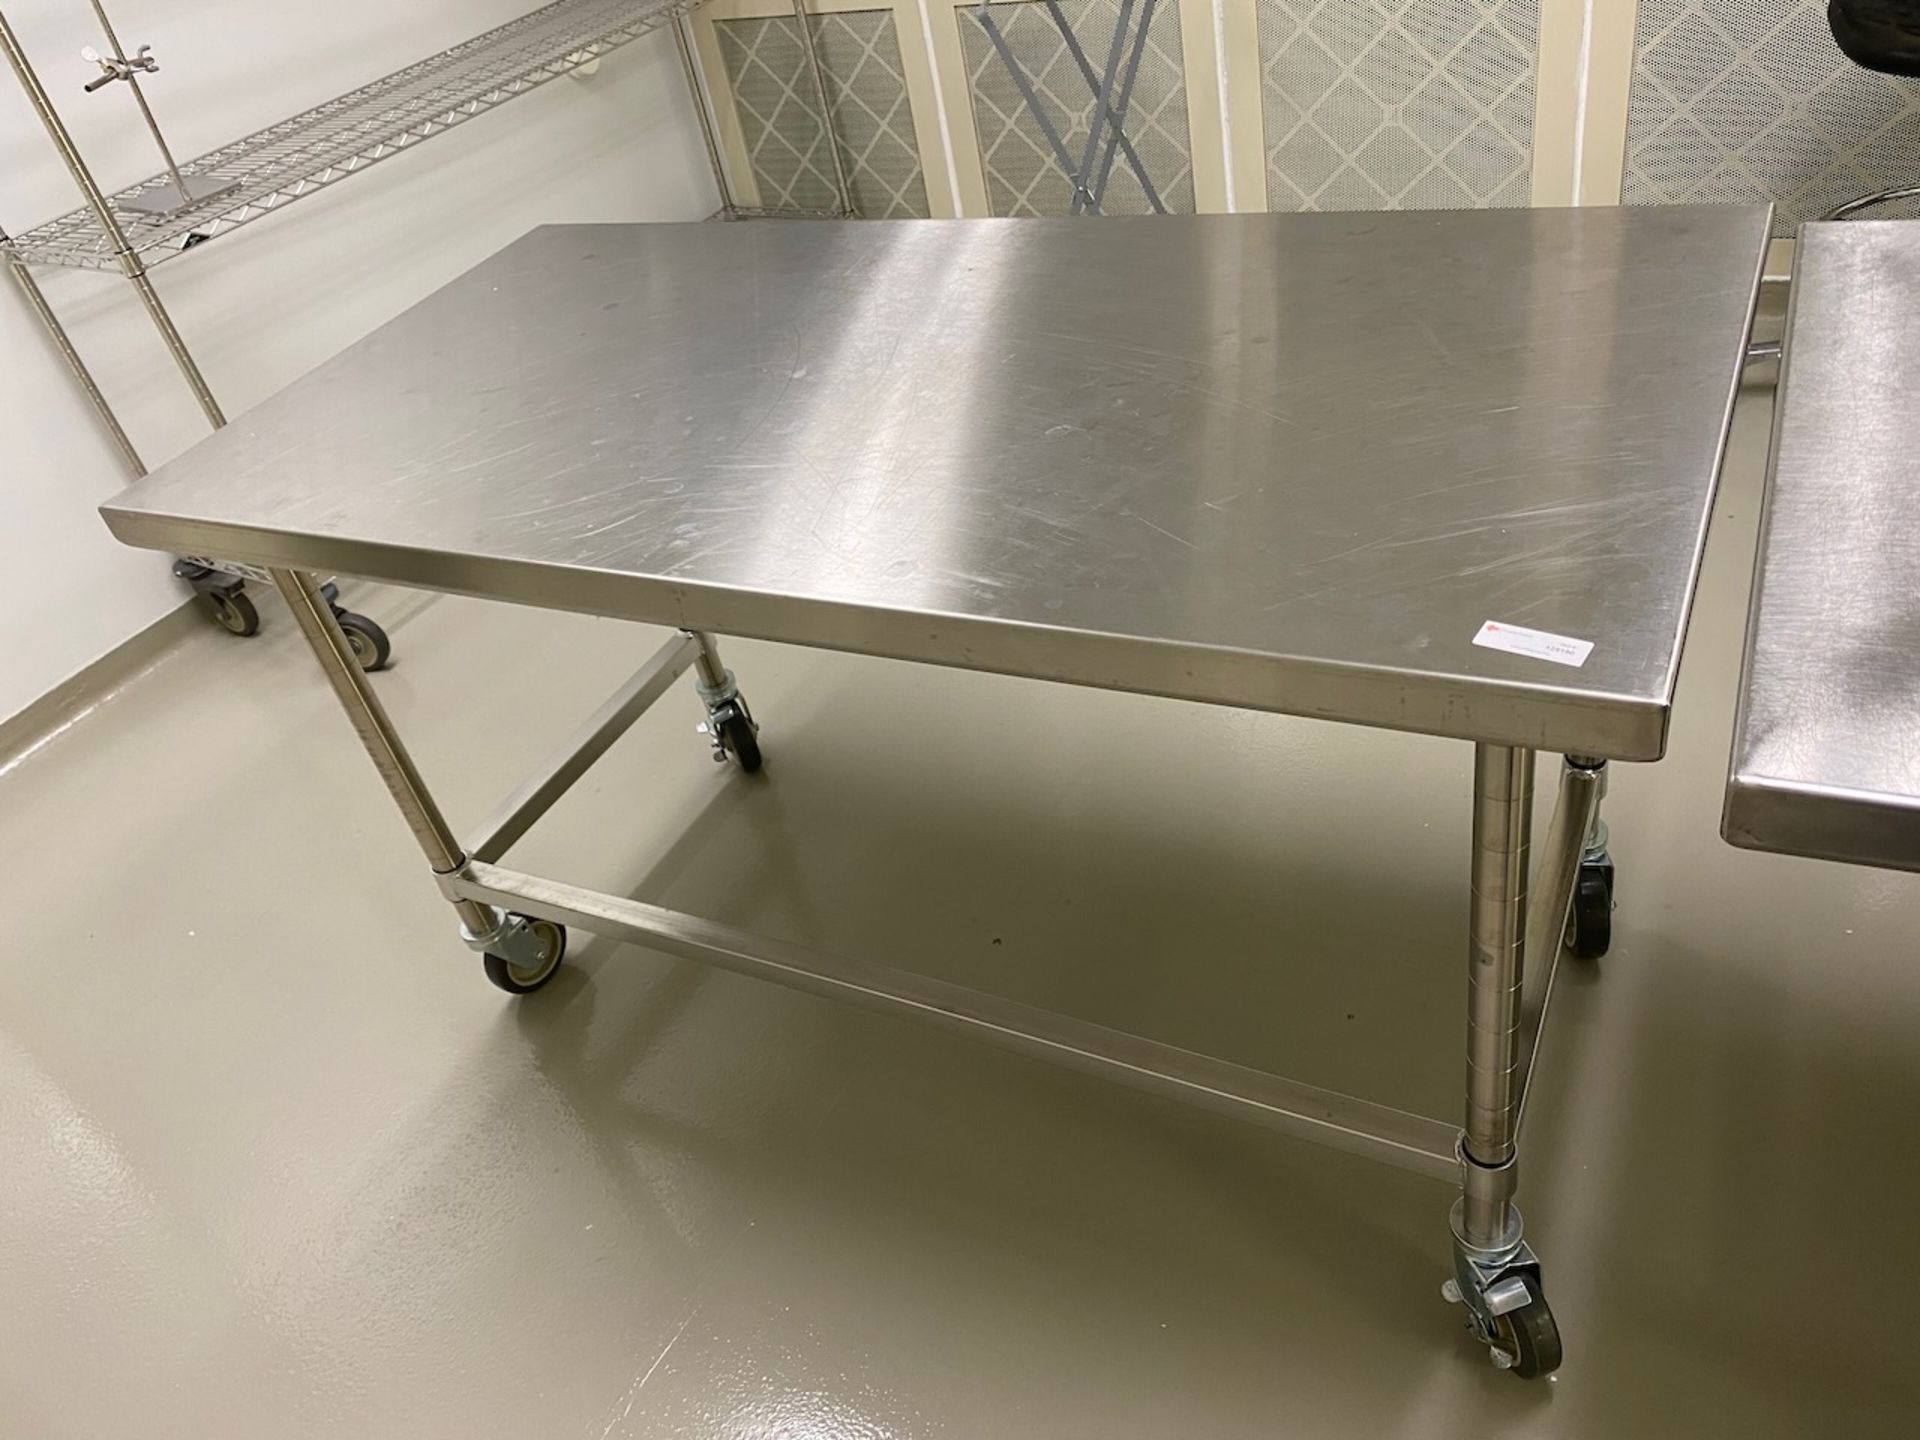 Stainless Steel Table on casters